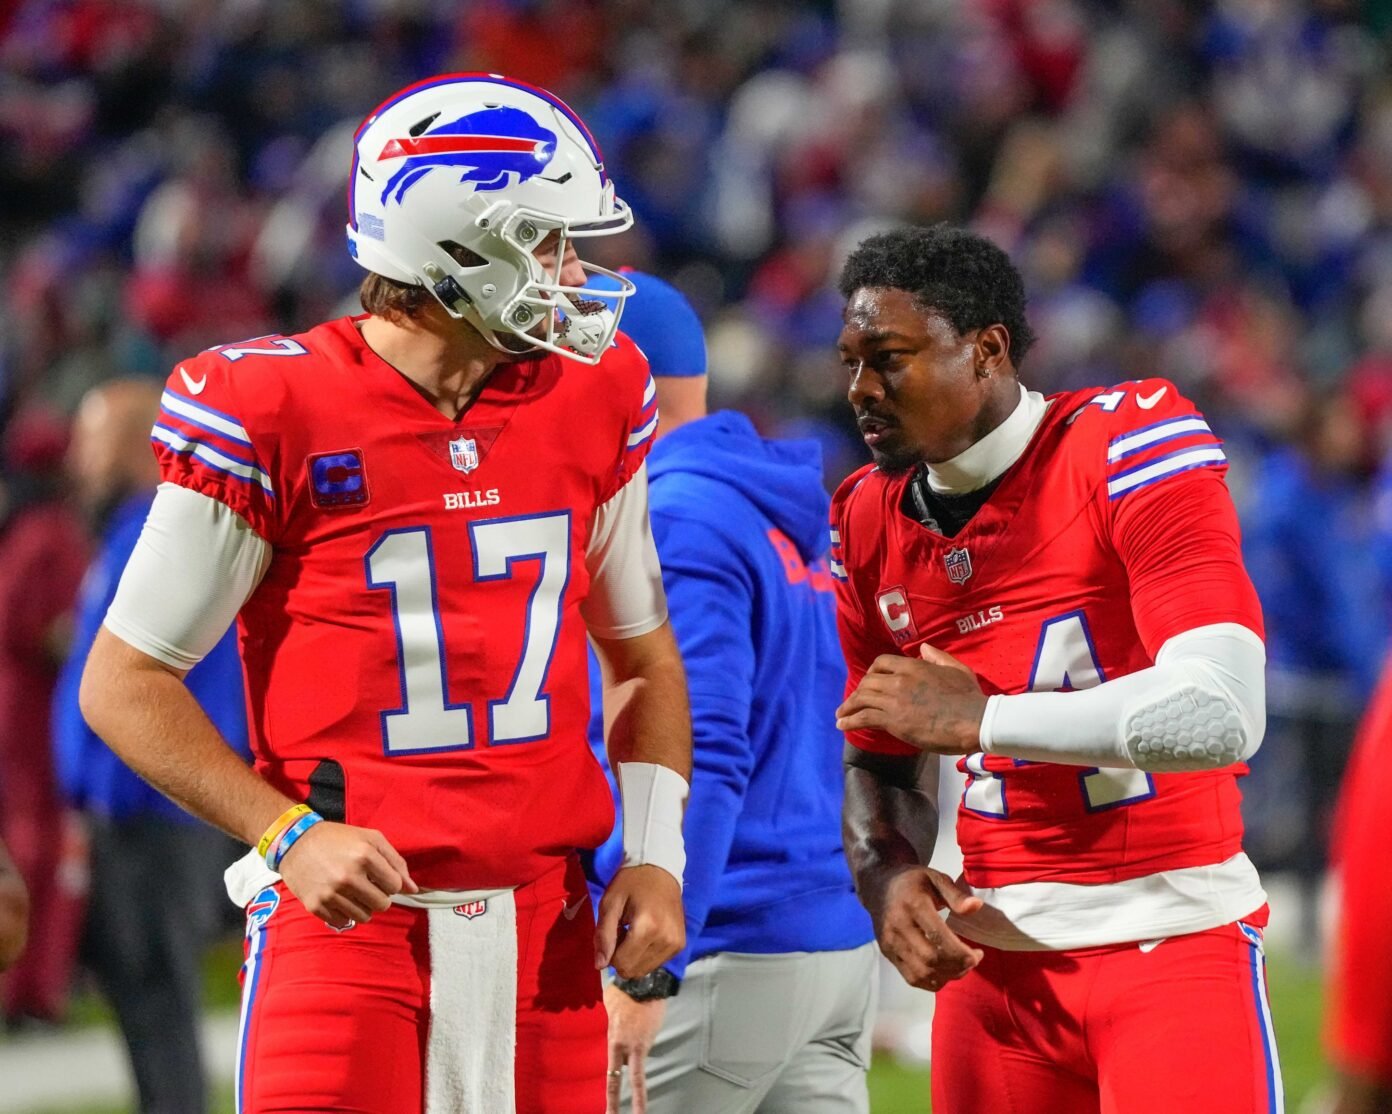 Steelers vs. Bills Prediction, Odds, and Picks for Wild Card Weekend